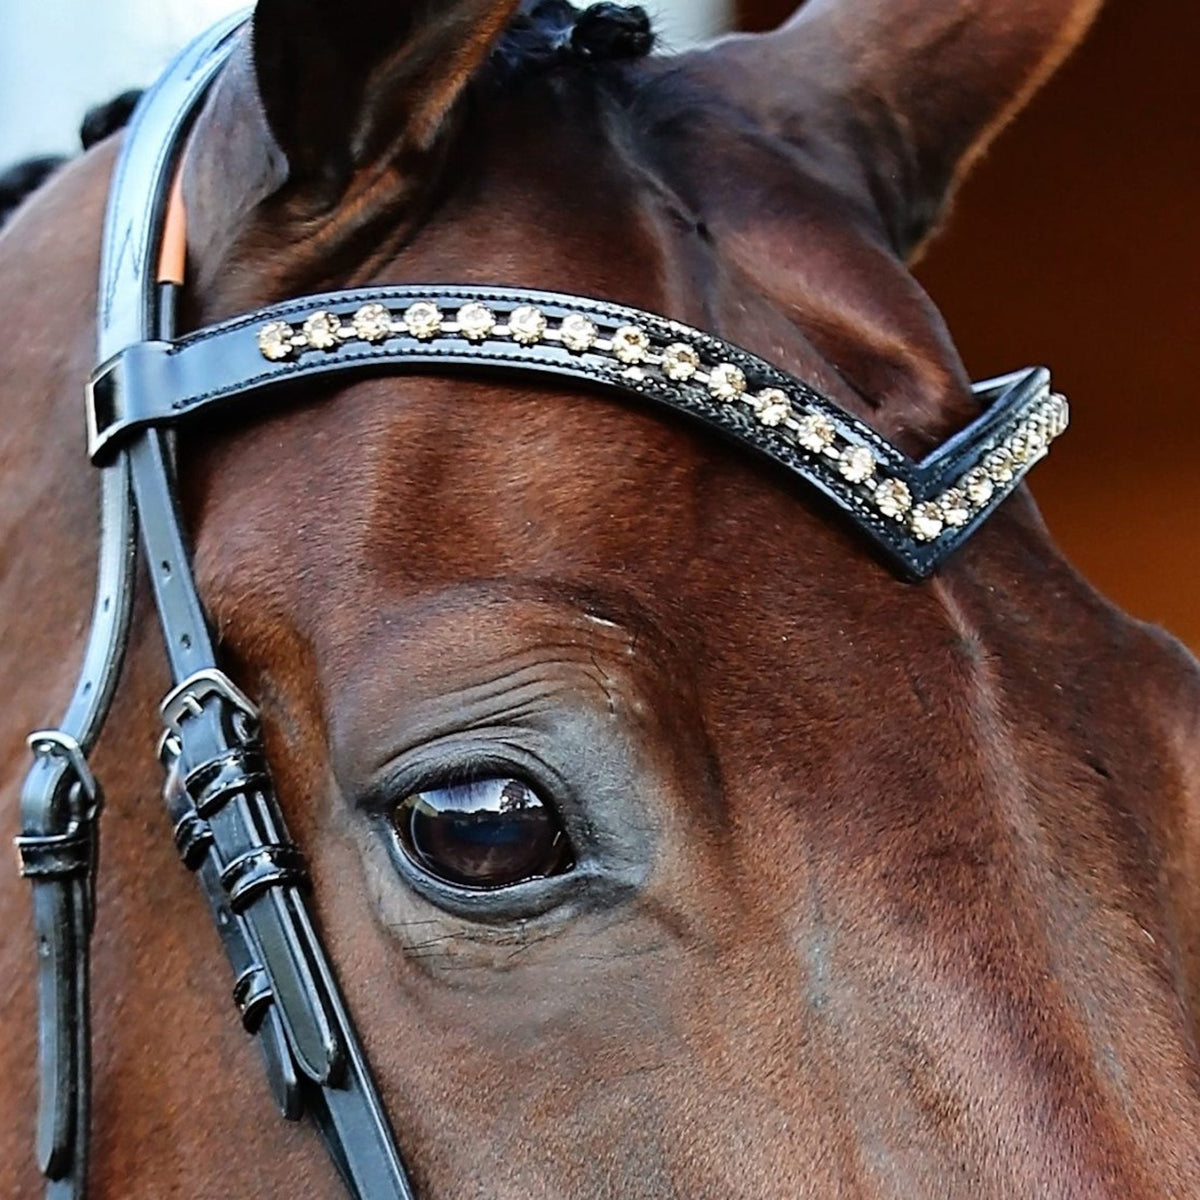 Close up of brow band on horse with row of crystals.